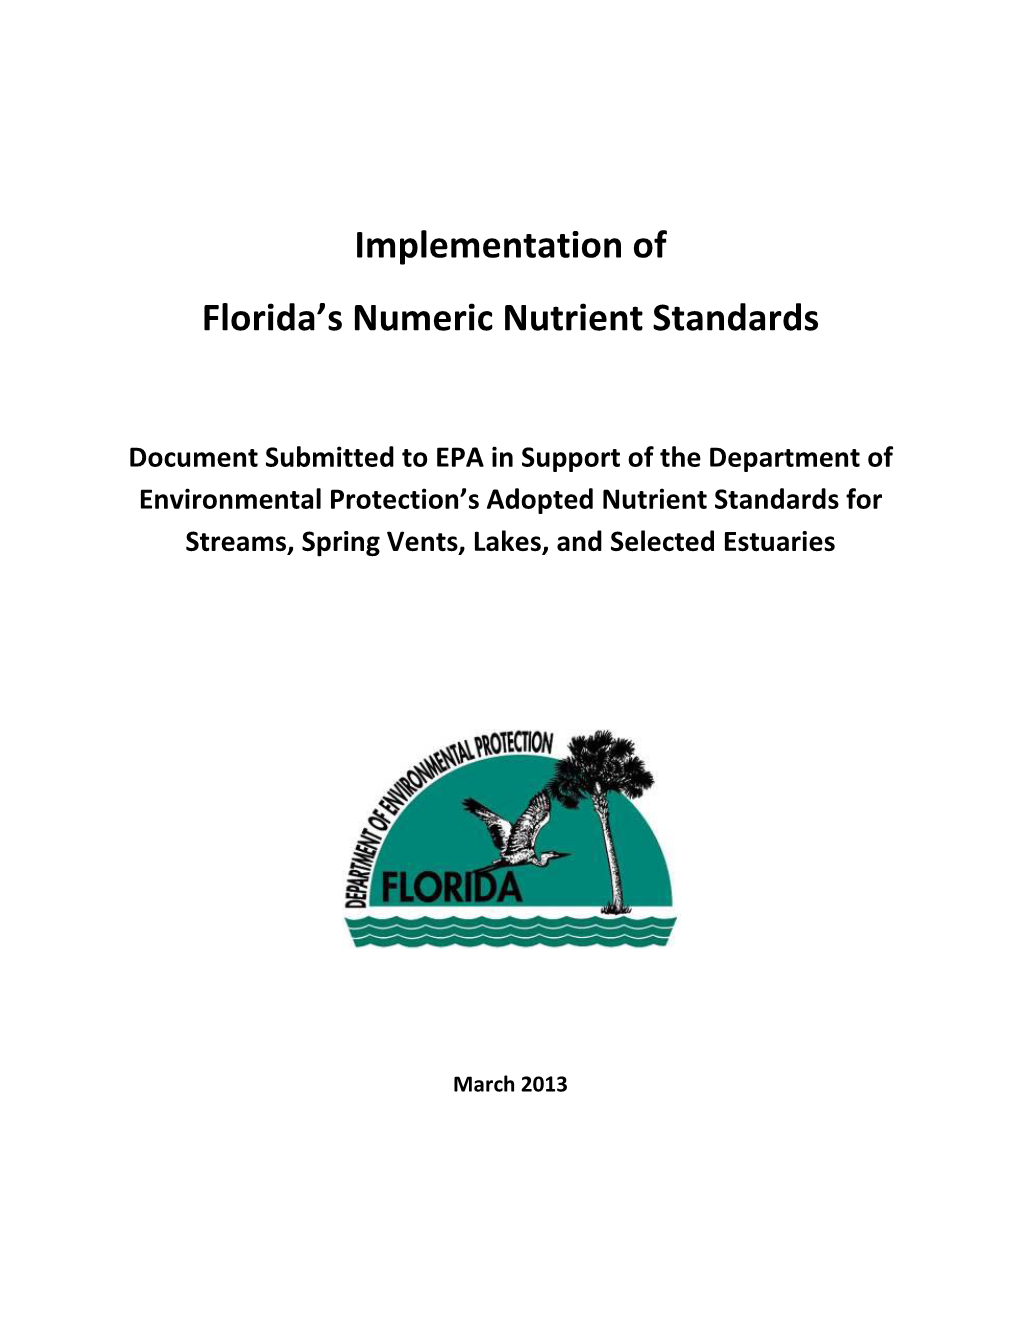 Implementation of Florida's Numeric Nutrient Standards